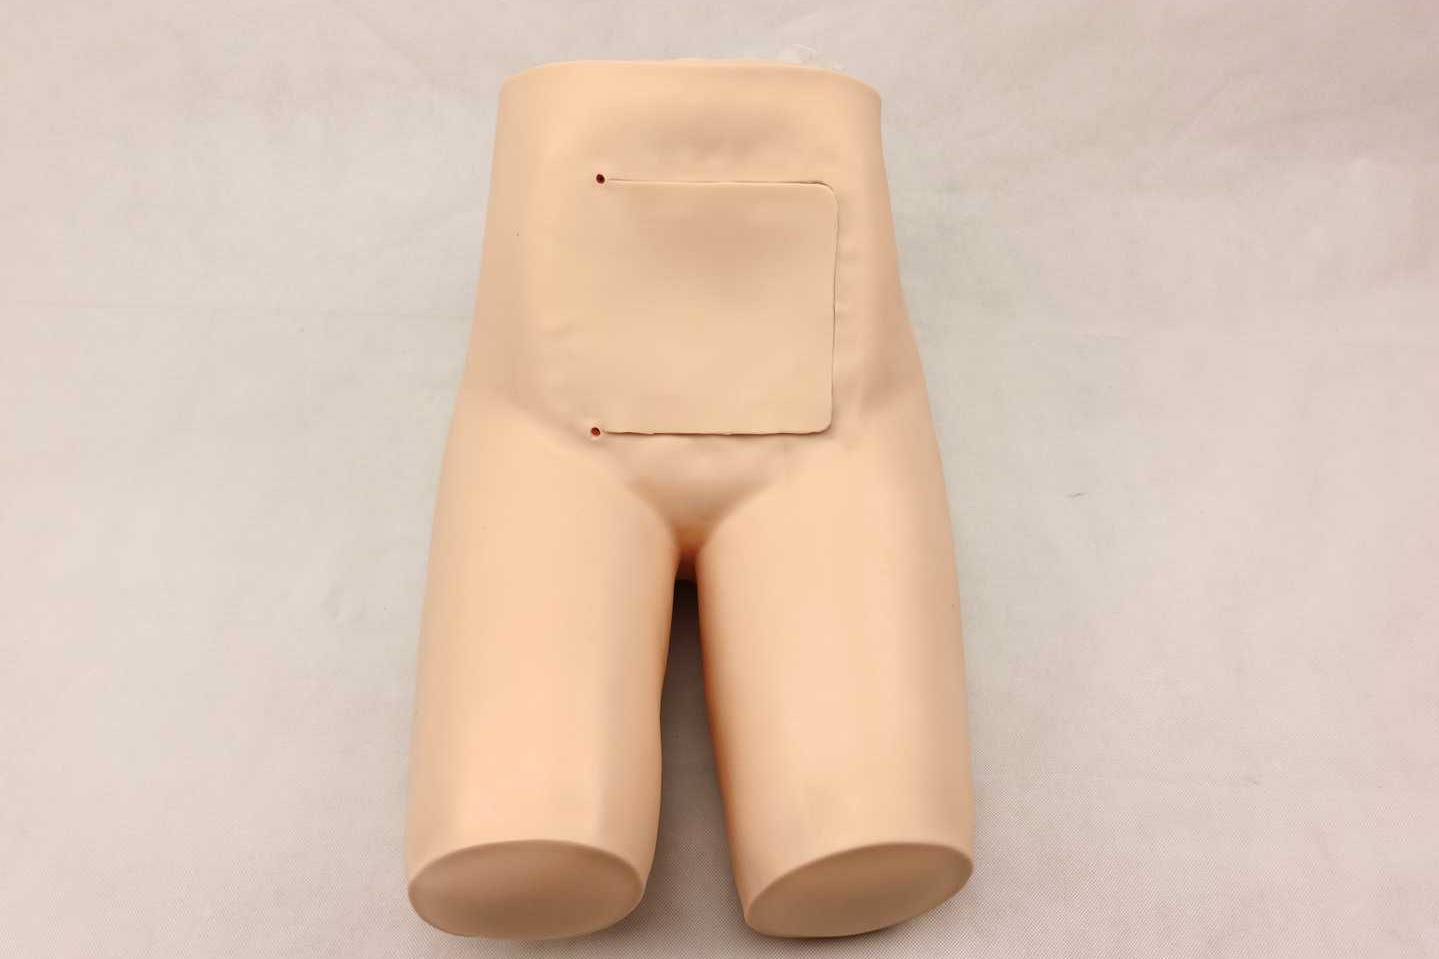 Enema and Assisted Defecation Training Model